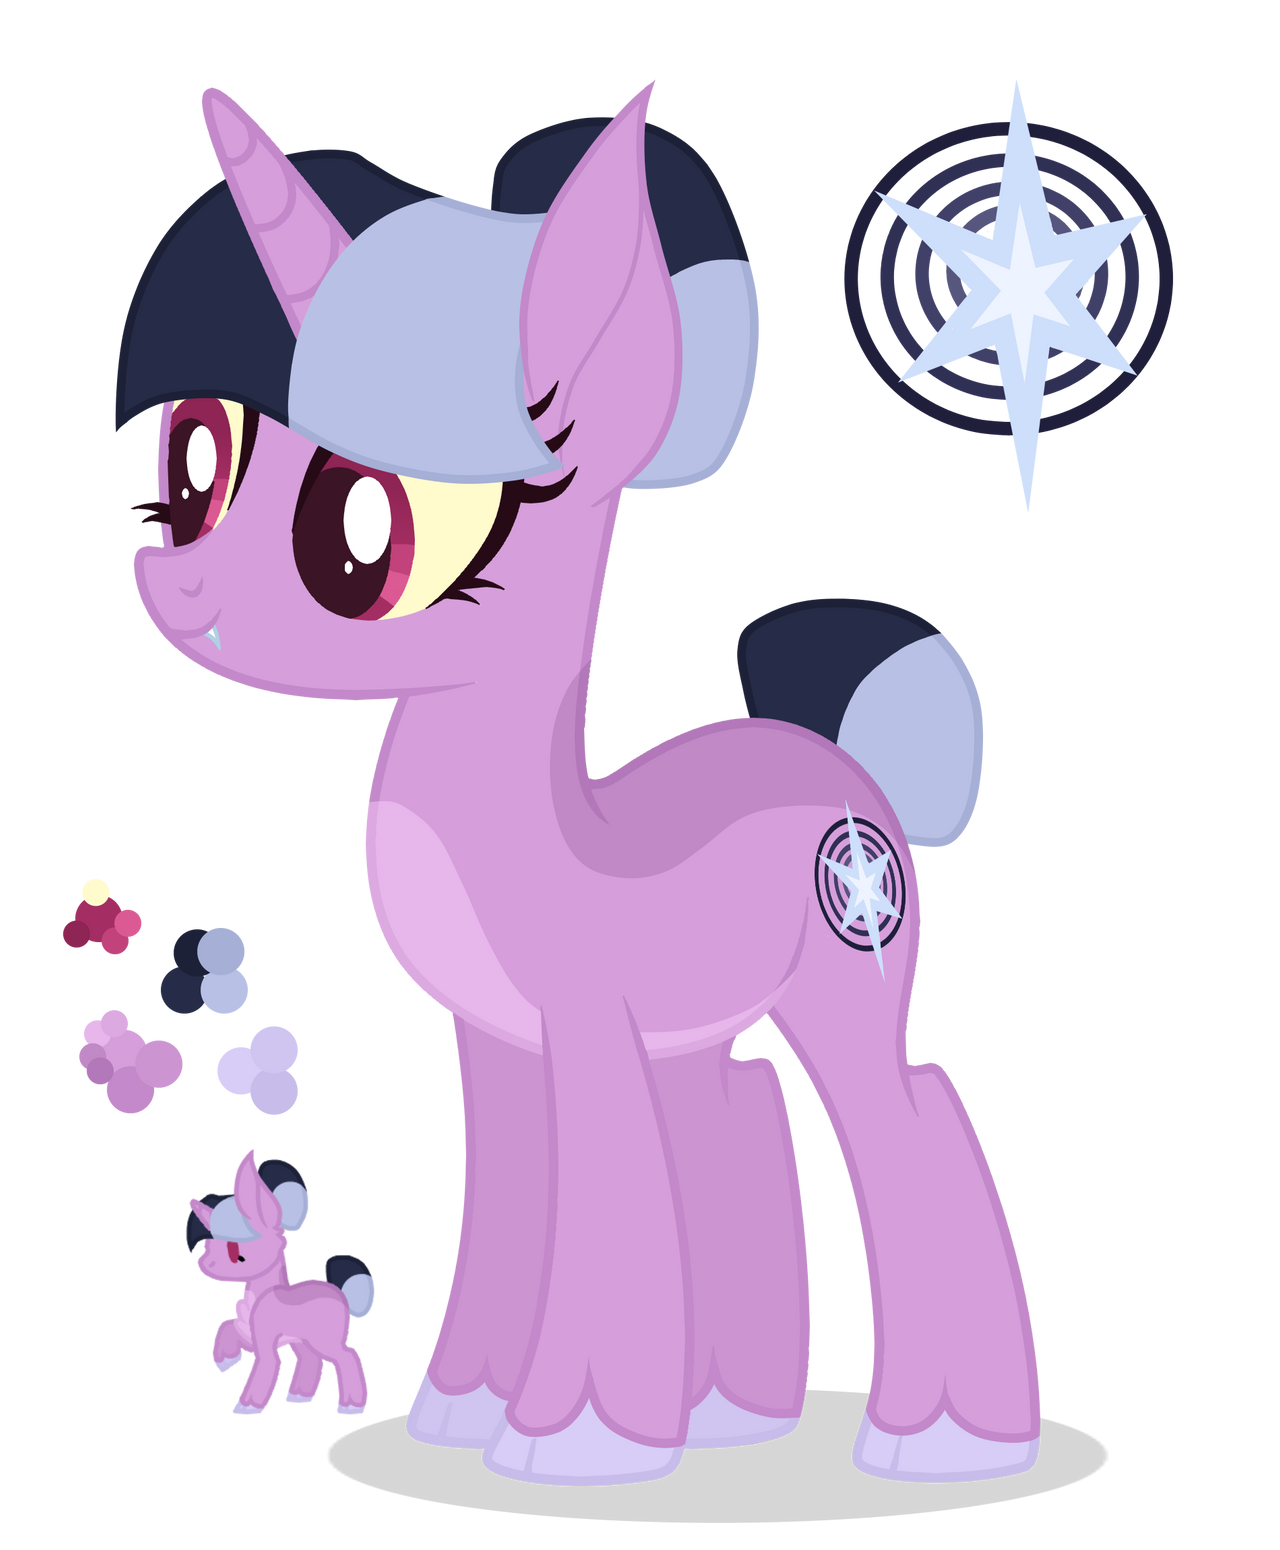 Discord/Twilight Adopt [SOLD] by monochrome-sunsets on DeviantArt